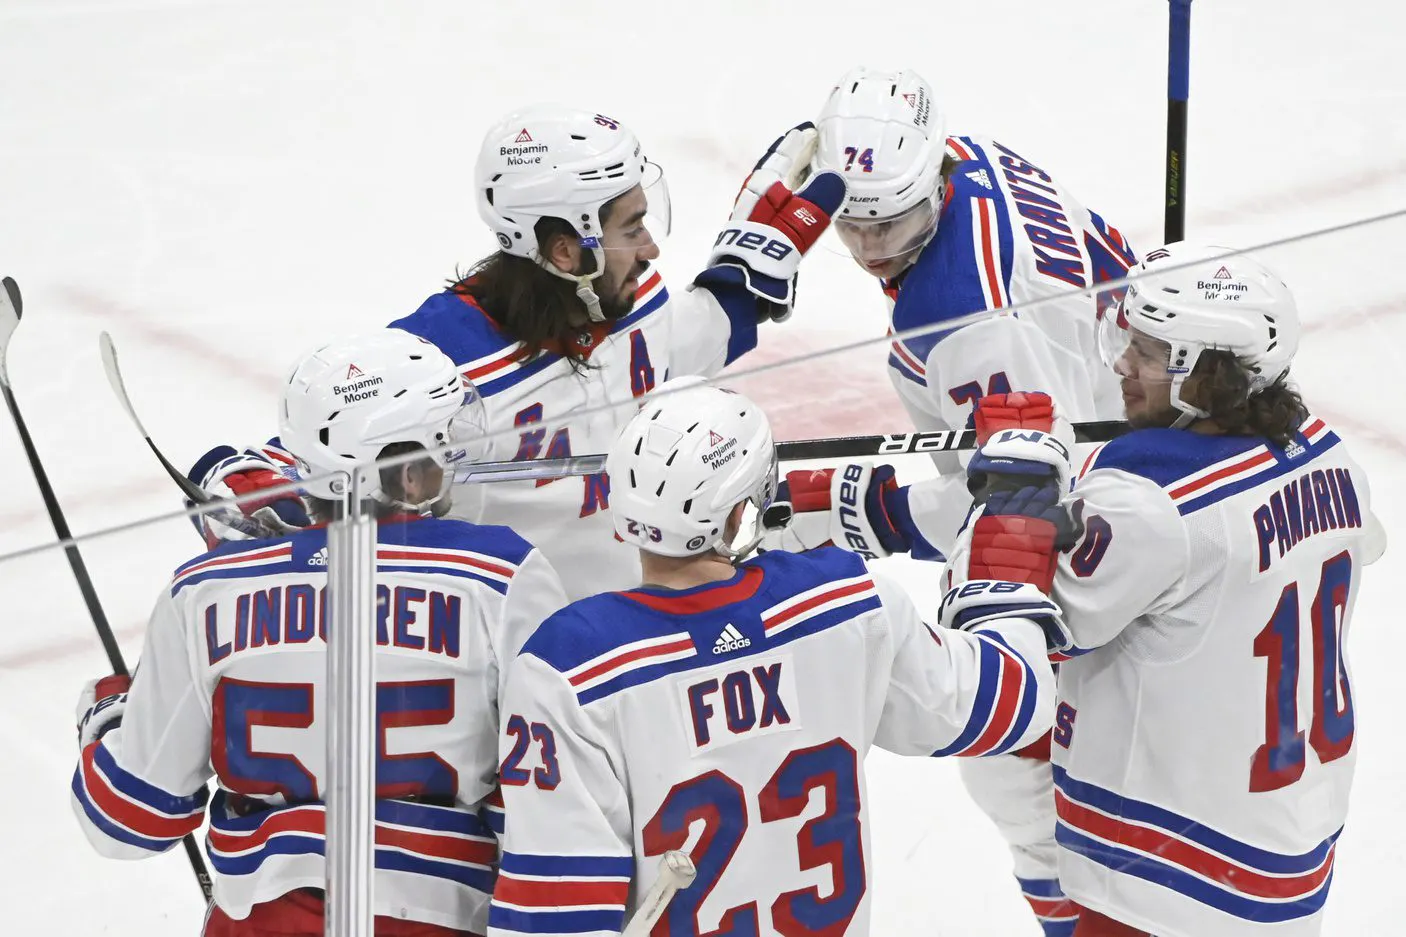 NHL Power Rankings: Seven straight wins sends the New York Rangers just outside the Top 5